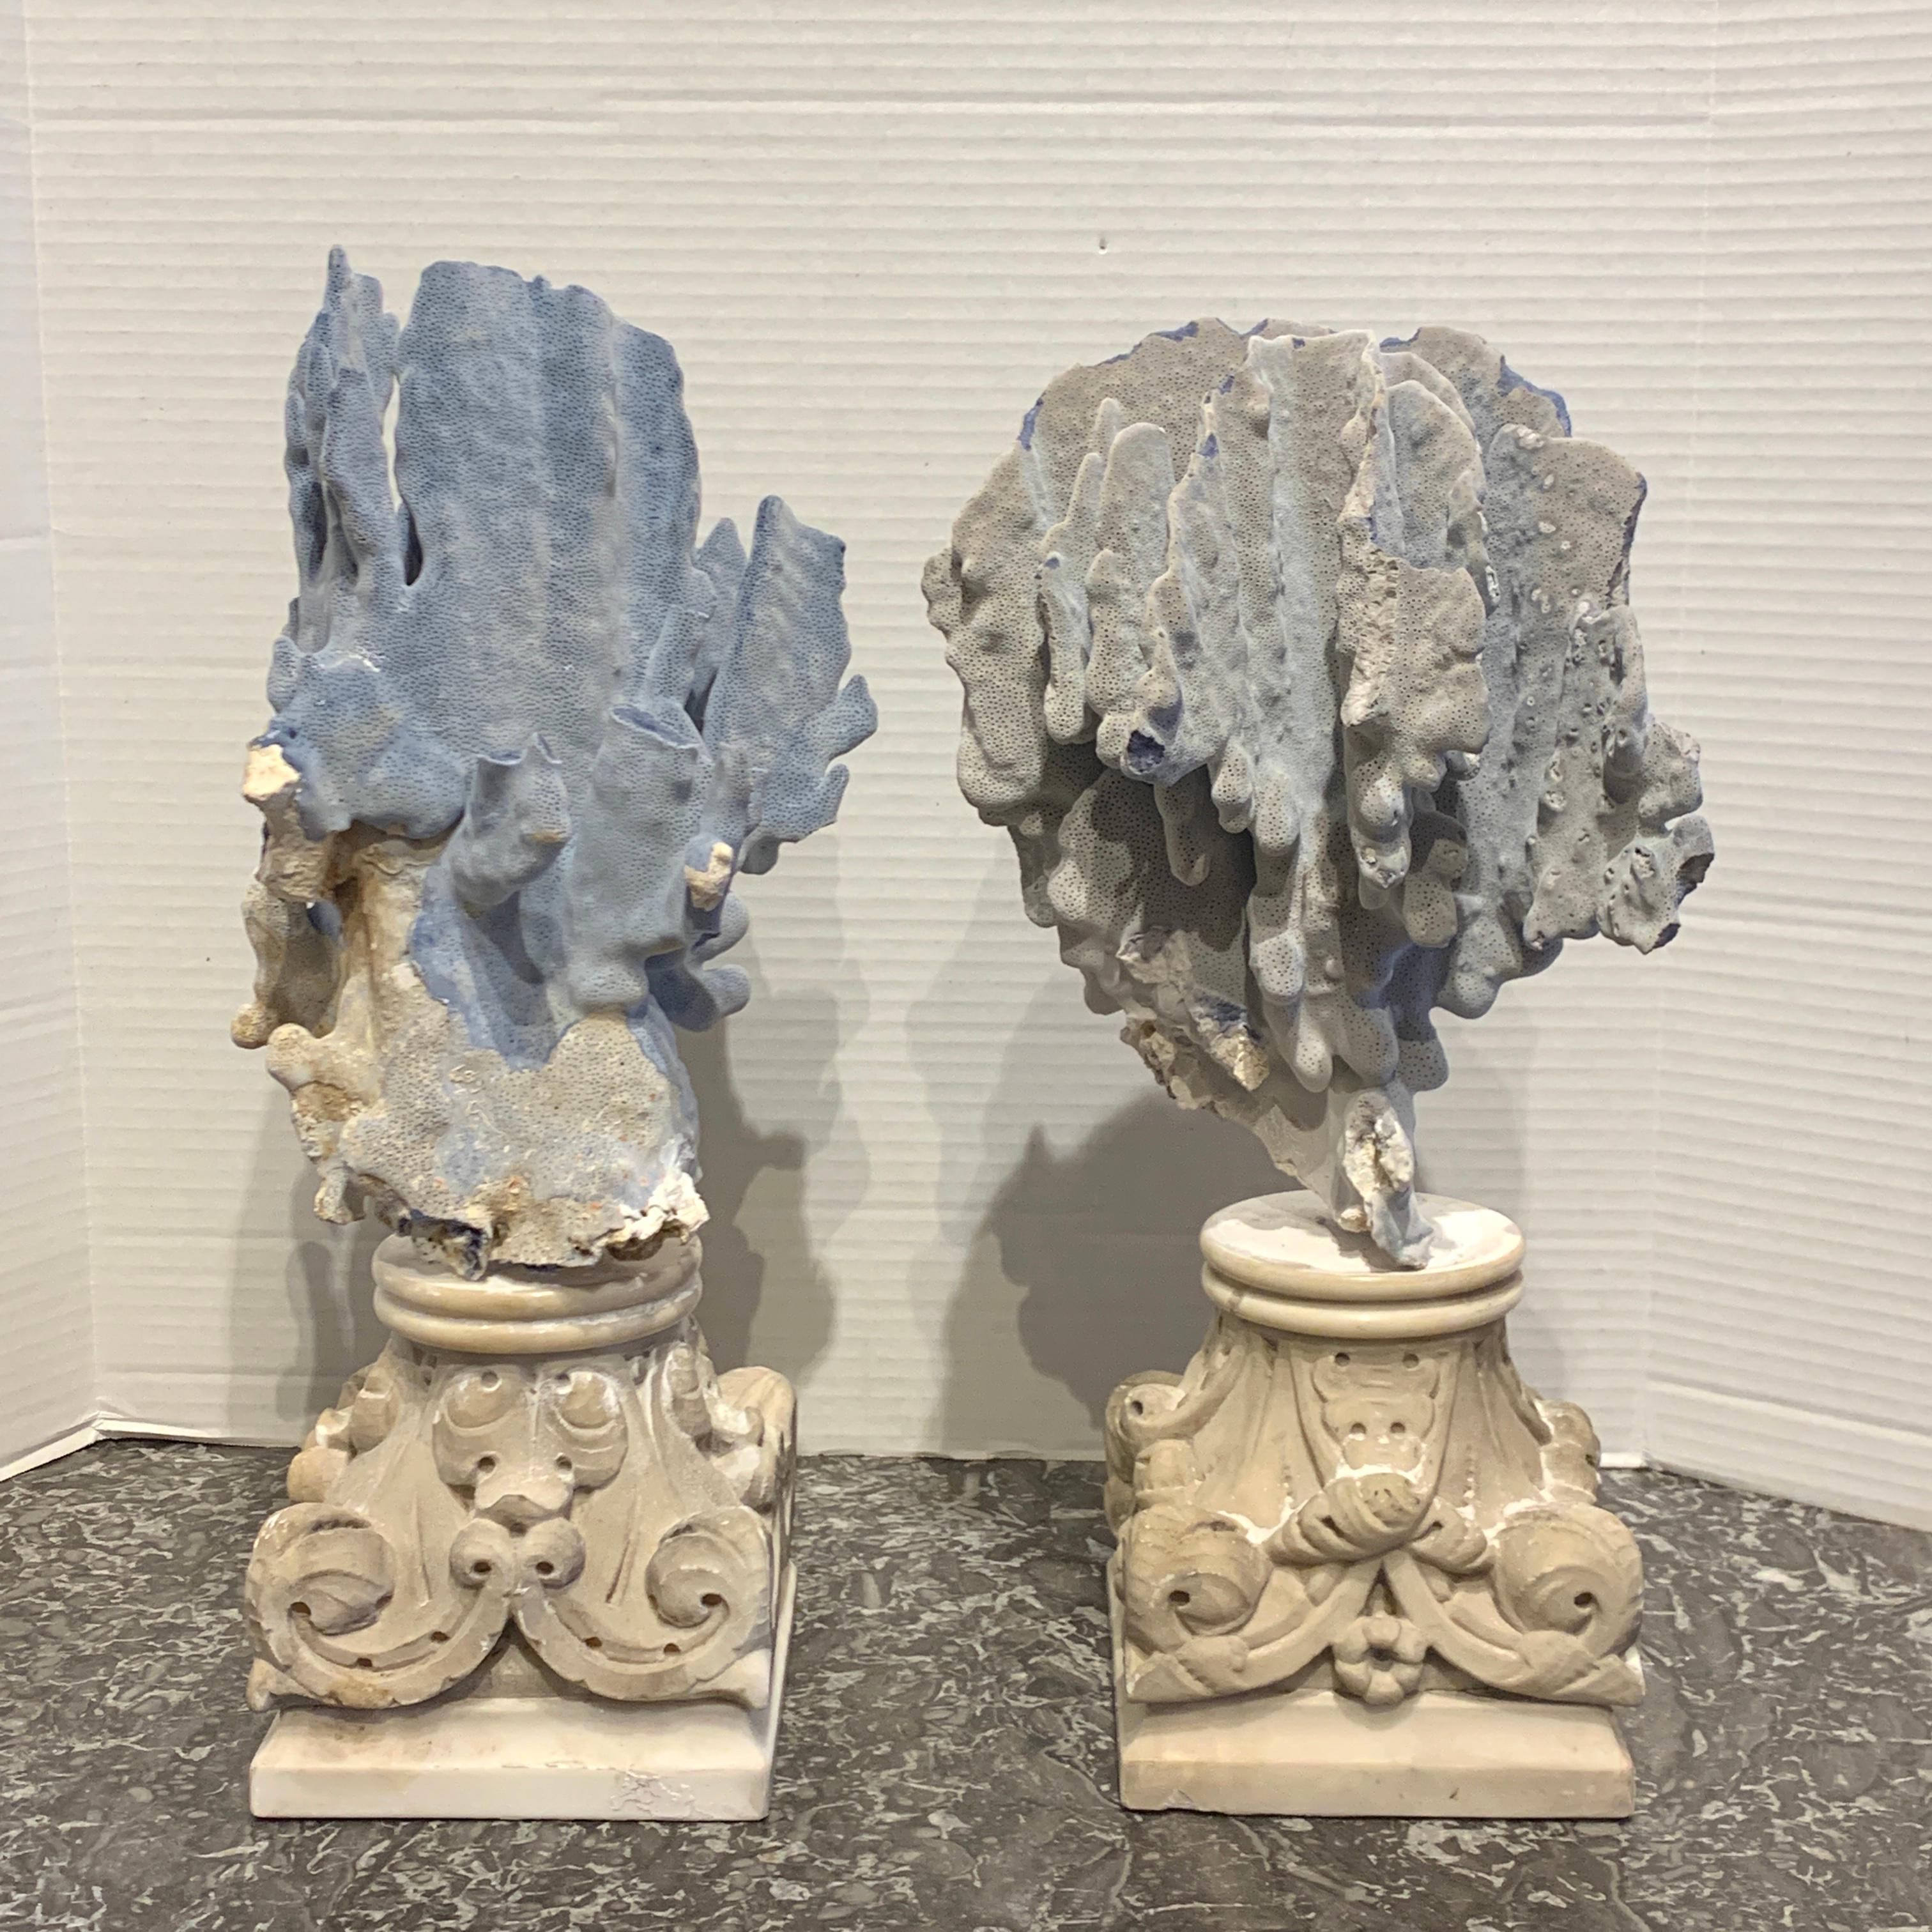 Pair of 19th century Grand Tour specimen blue coral on Carrara marble pedestals, each one removable from the finely carved 7-inch square Greek/roman style Carrara marble bases.
Each specimen coral and marble base weighs approximately 30 pounds.
This